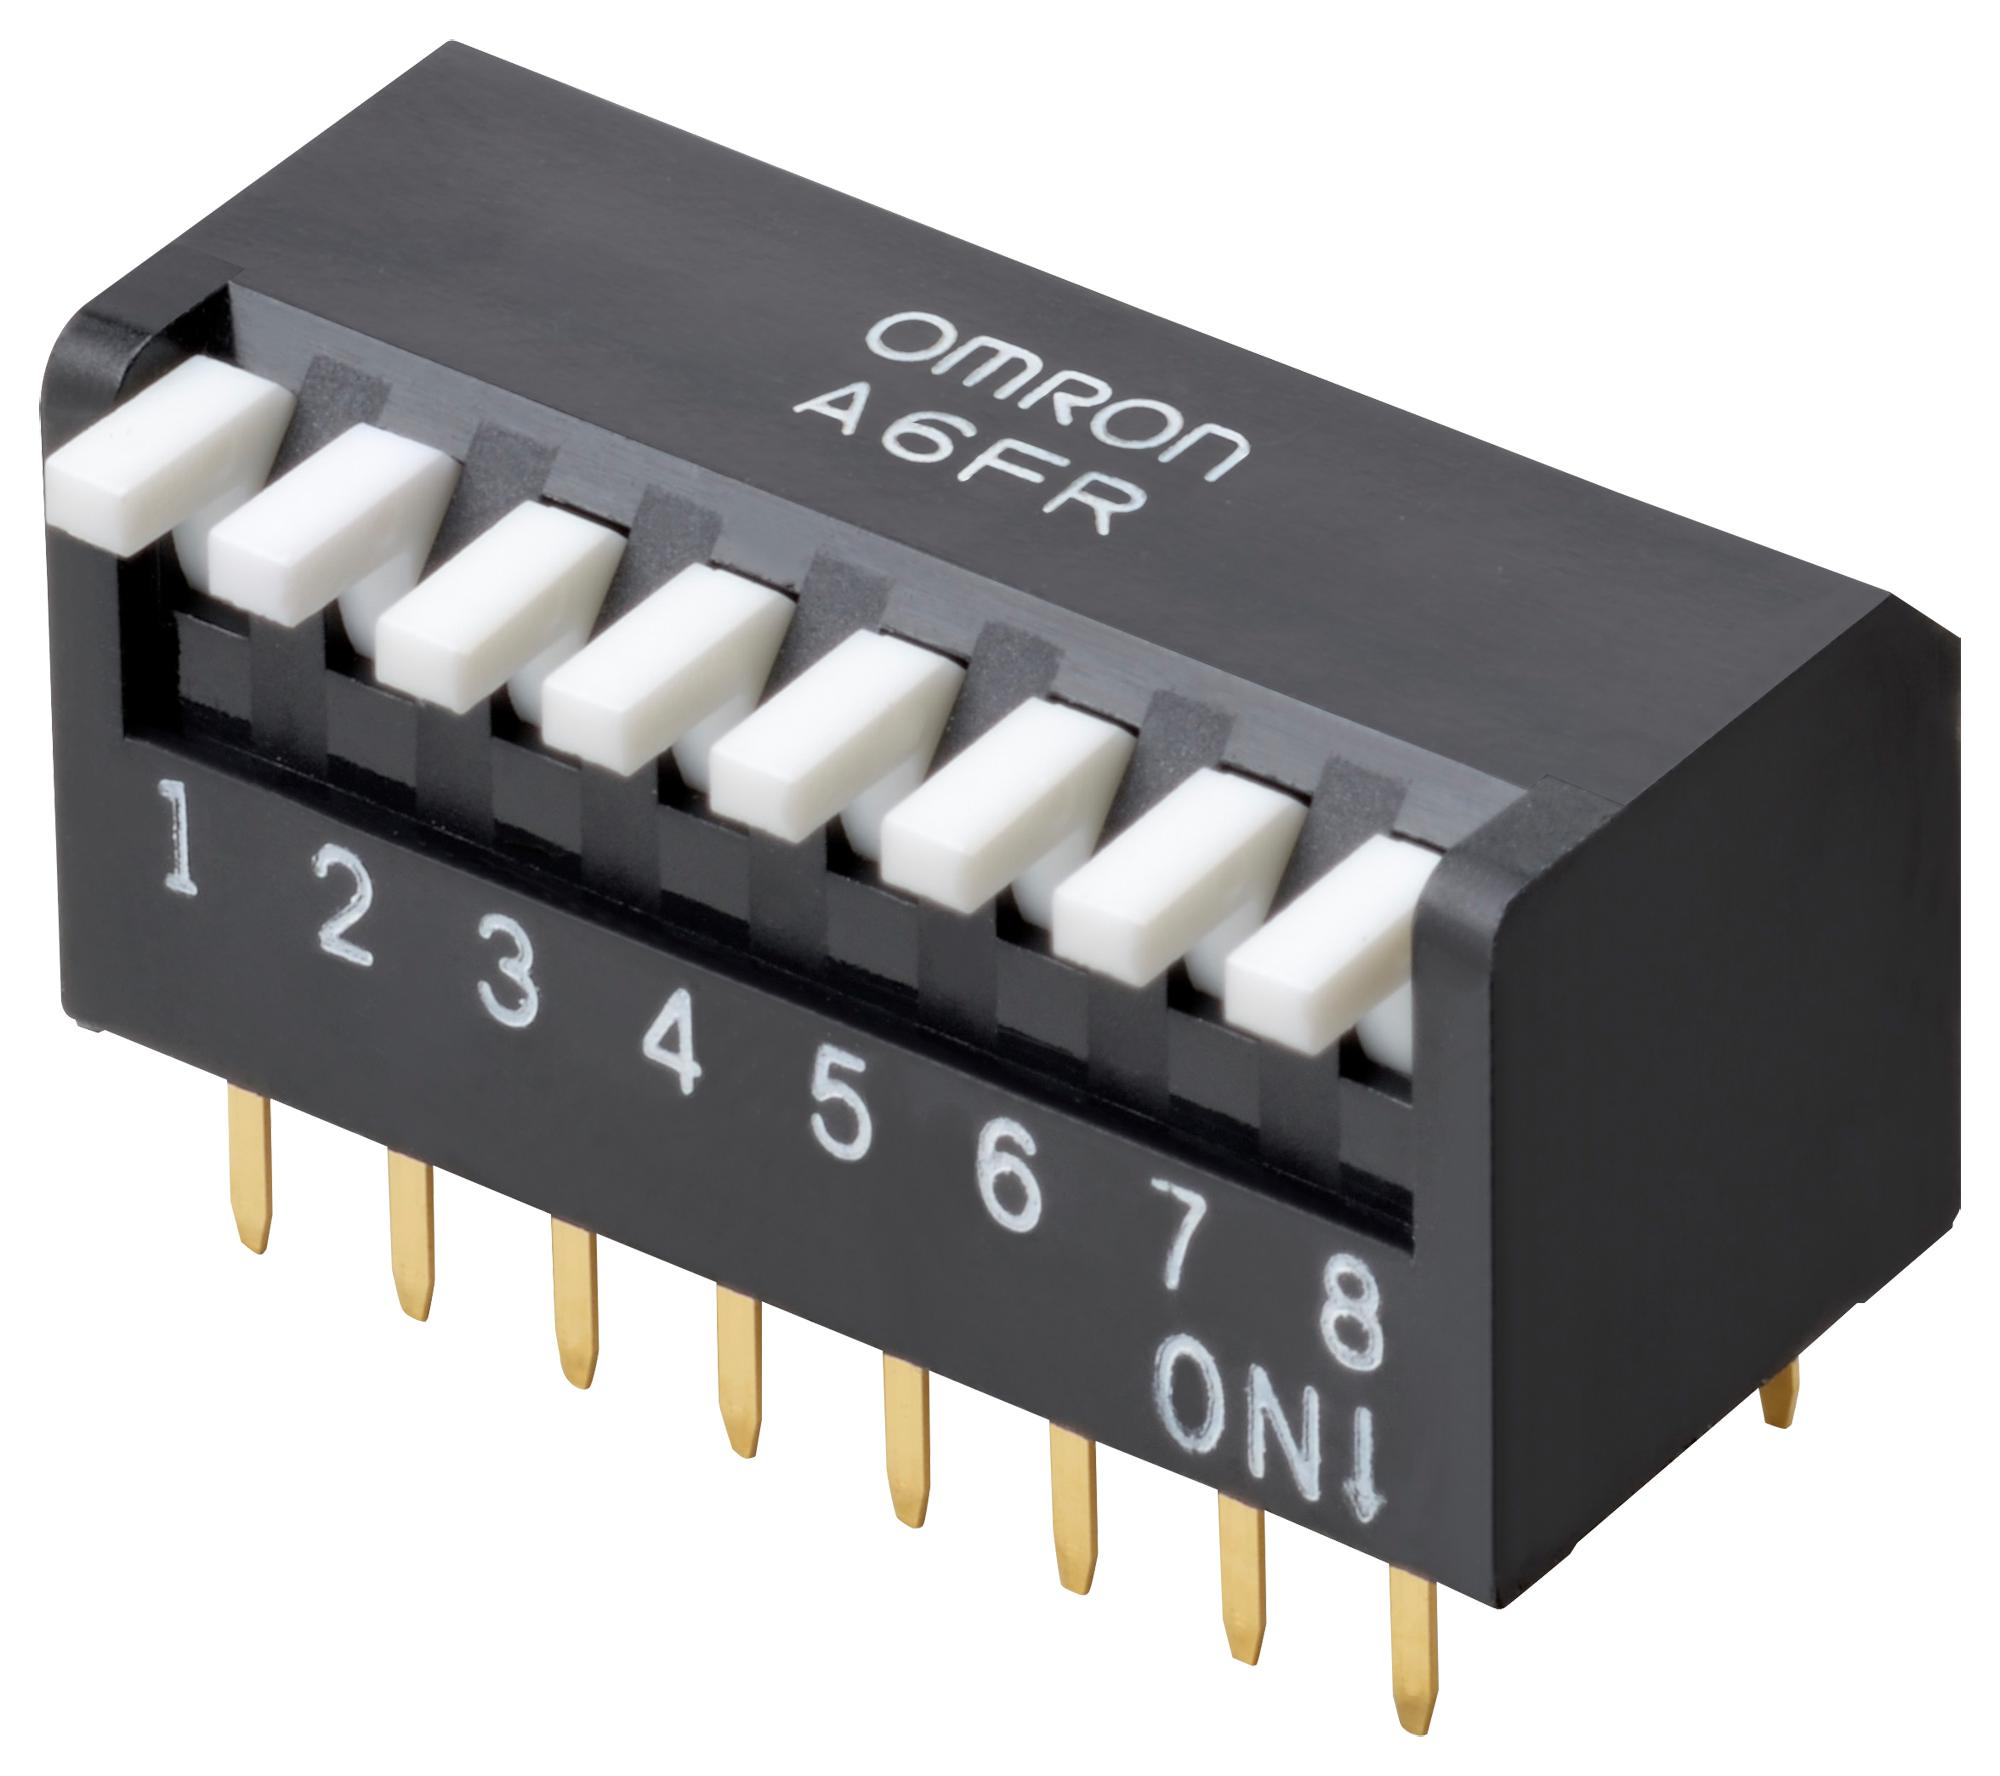 A6FR-5104 DIP SWITCH, 5POS, SPST, PIANO KEY, TH OMRON